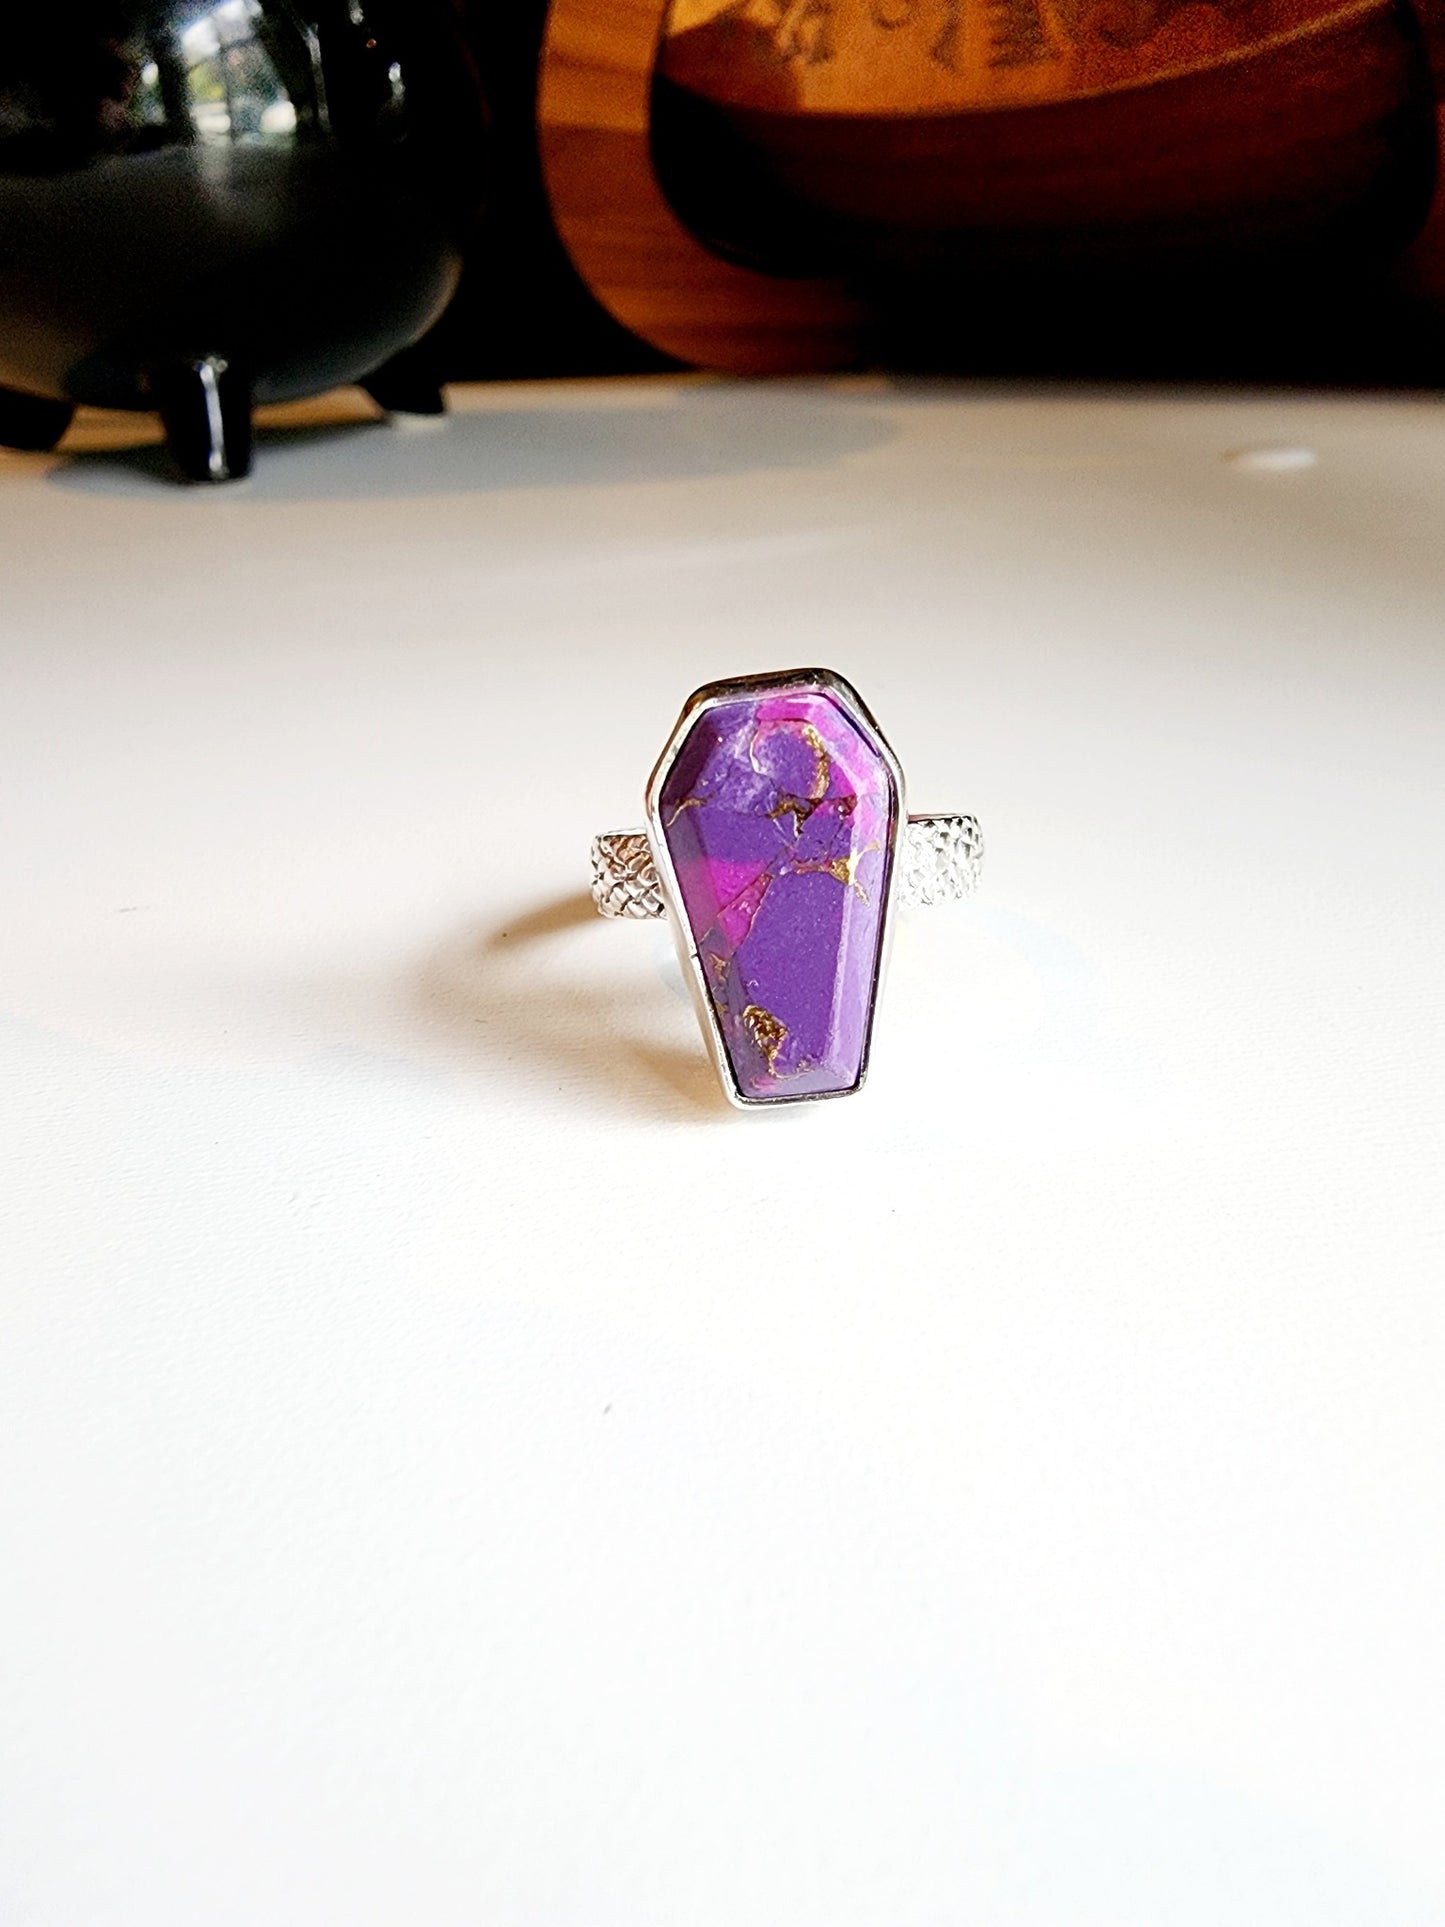 Purple with gold speckled coffin stone shaped ring with snakeskin like textured band